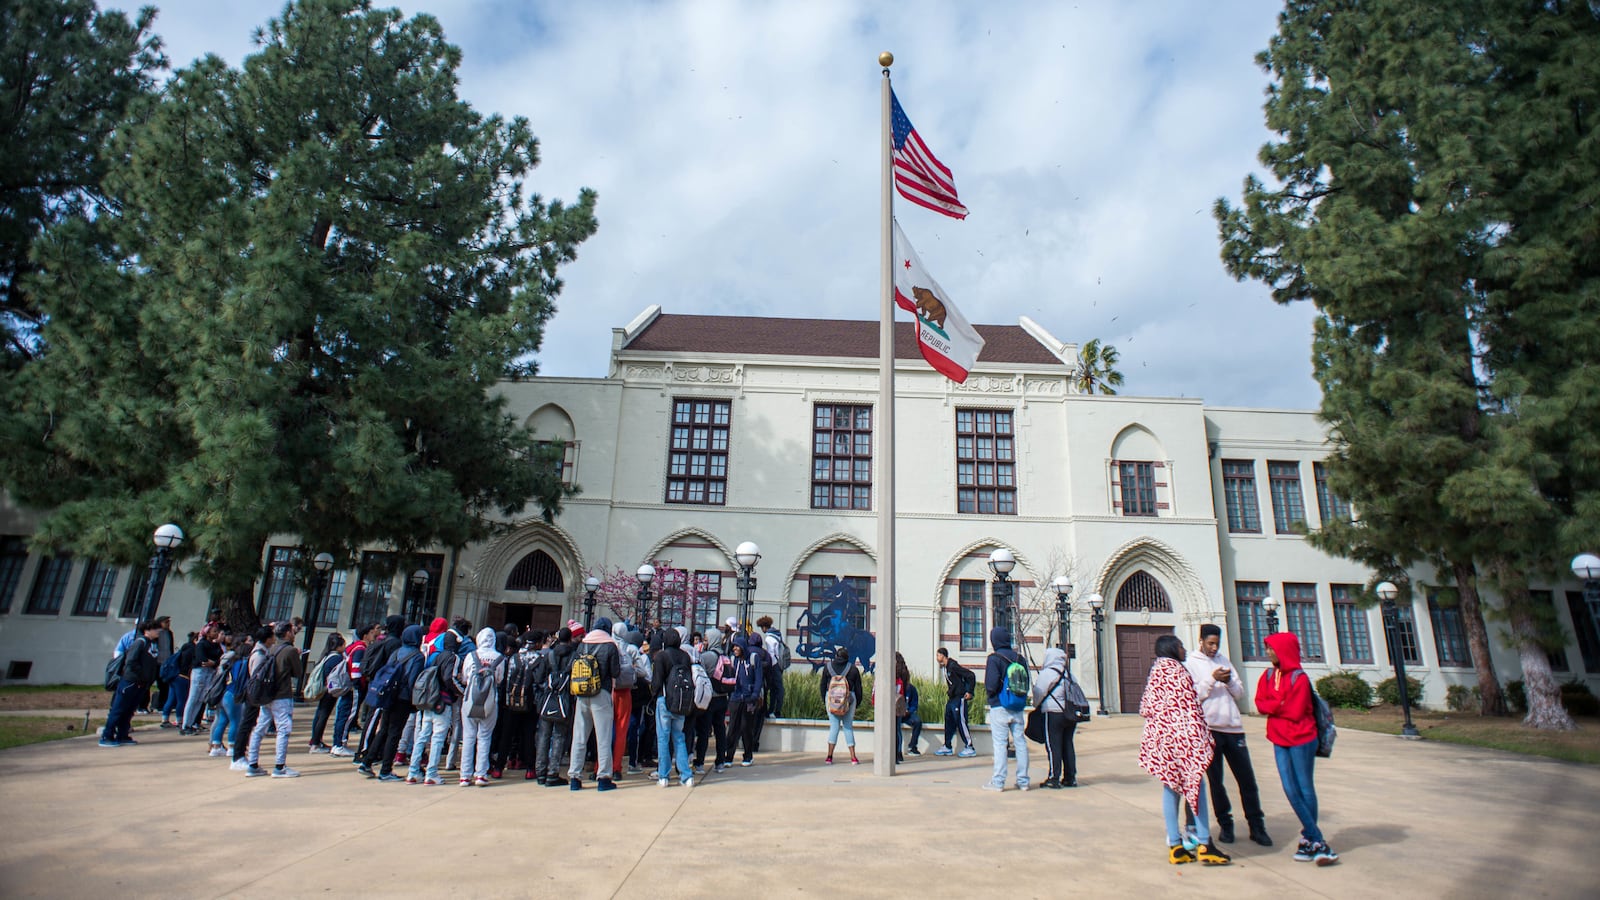 Black students protested the dress code at John Muir High School in Pasadena, California earlier this year. It was one of the schools the district invested in after winning a federal magnet schools grant. The district had also applied for school integration funding.